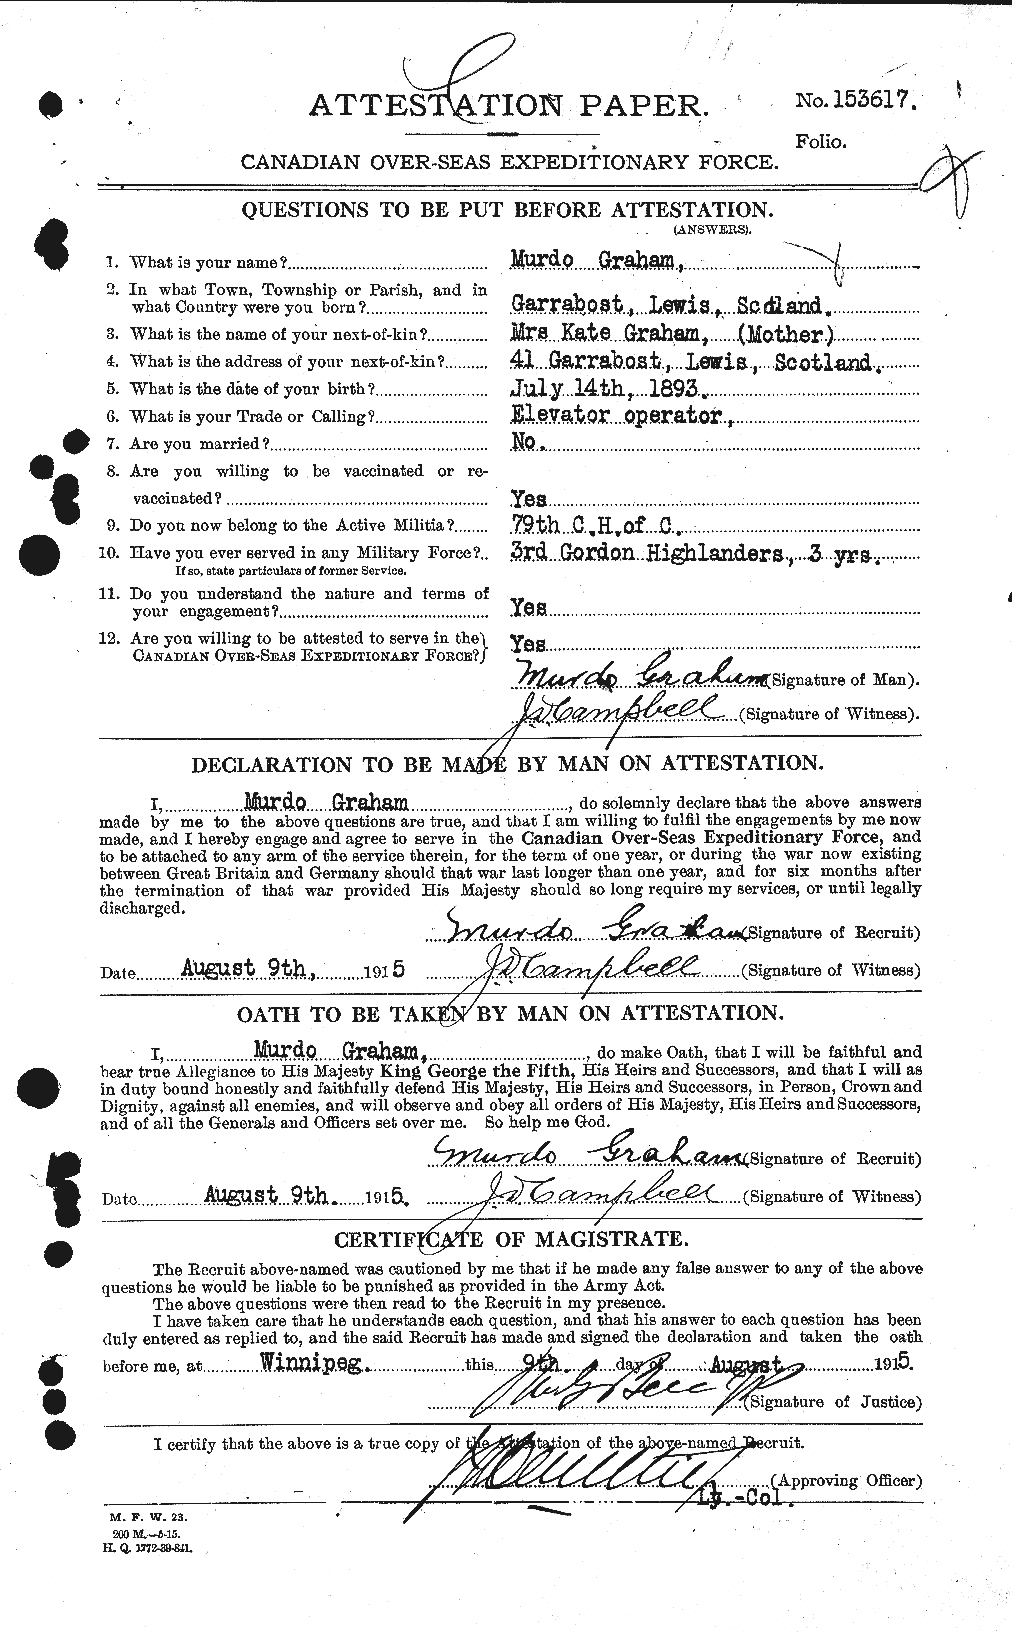 Personnel Records of the First World War - CEF 359311a